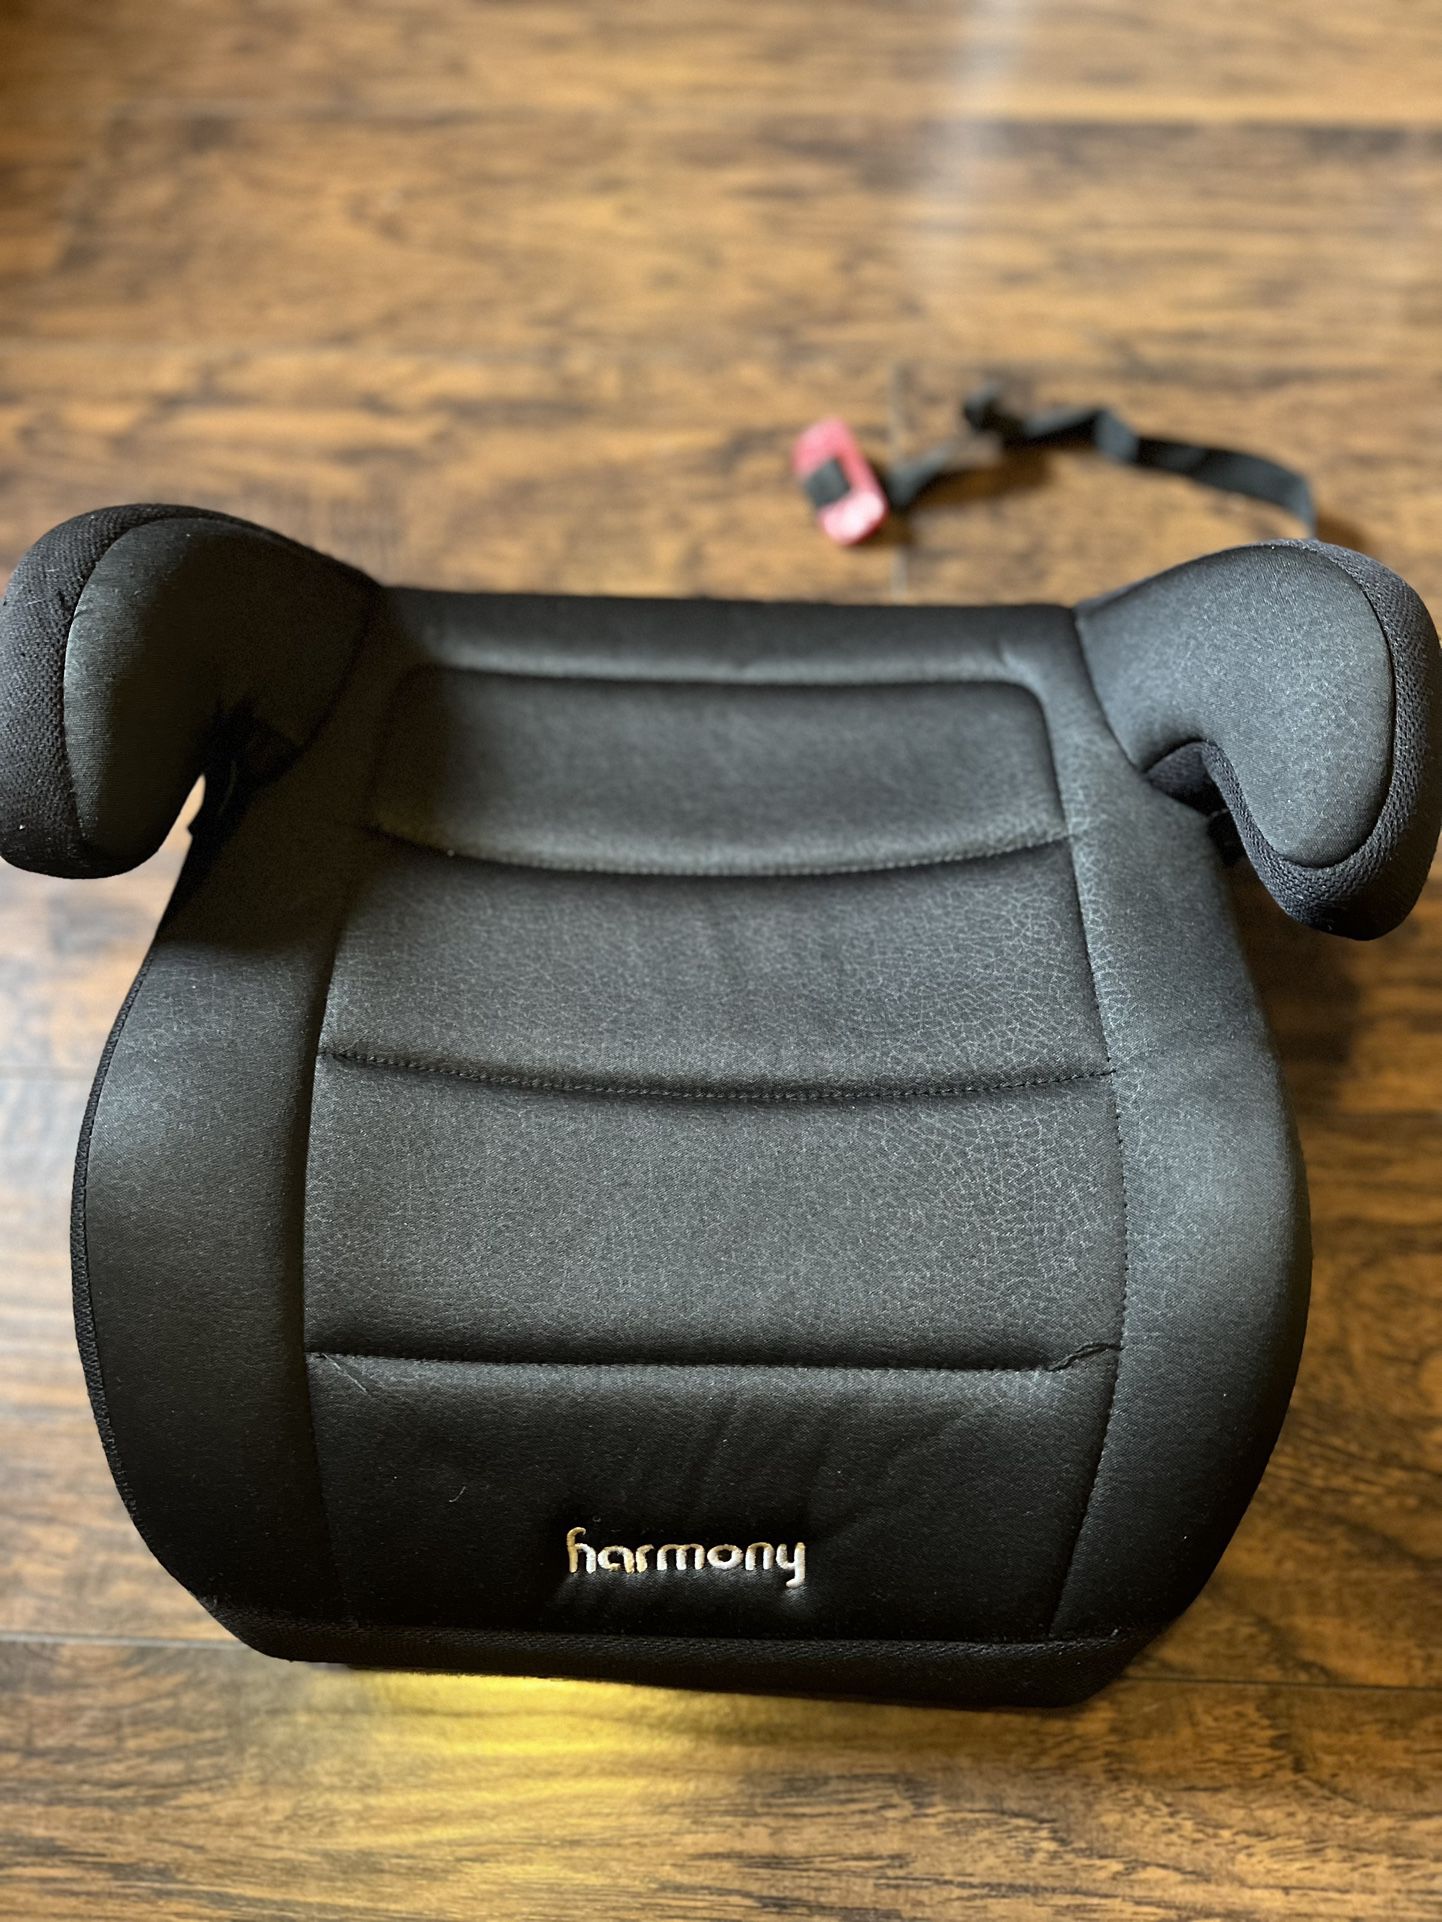 Free Harmony Booster Seat